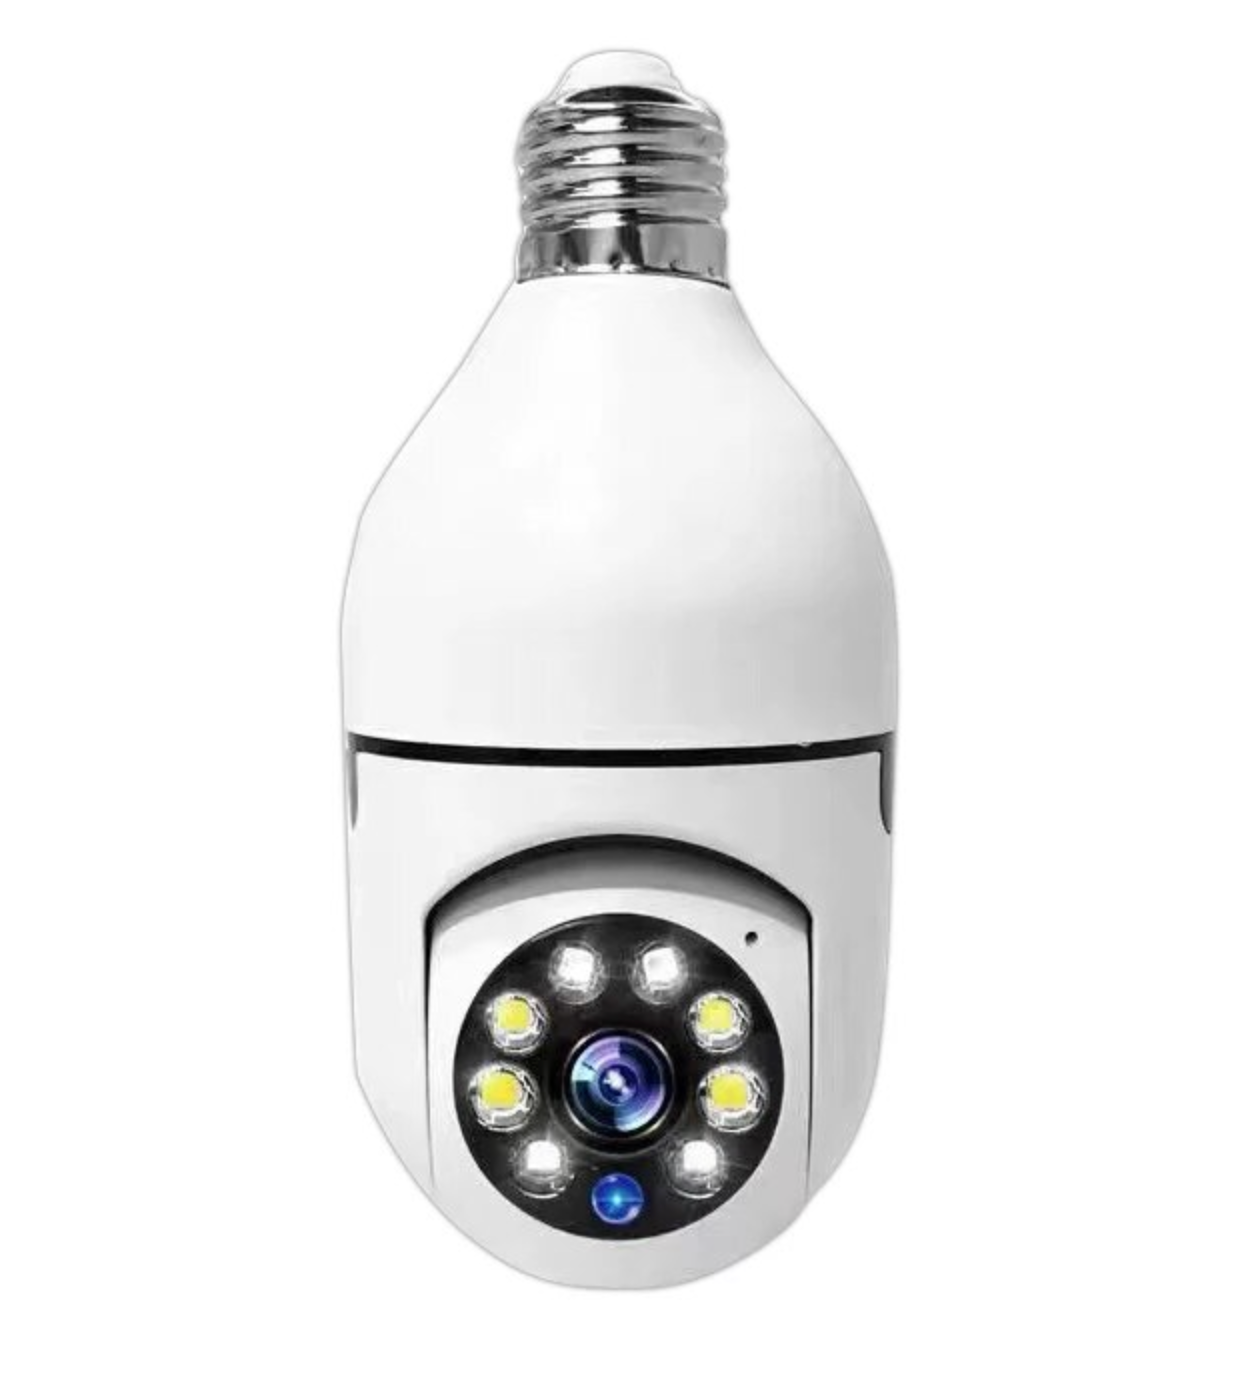 Additional iSecurity Camera Light Bulb - One Time Promo Offer $9.95